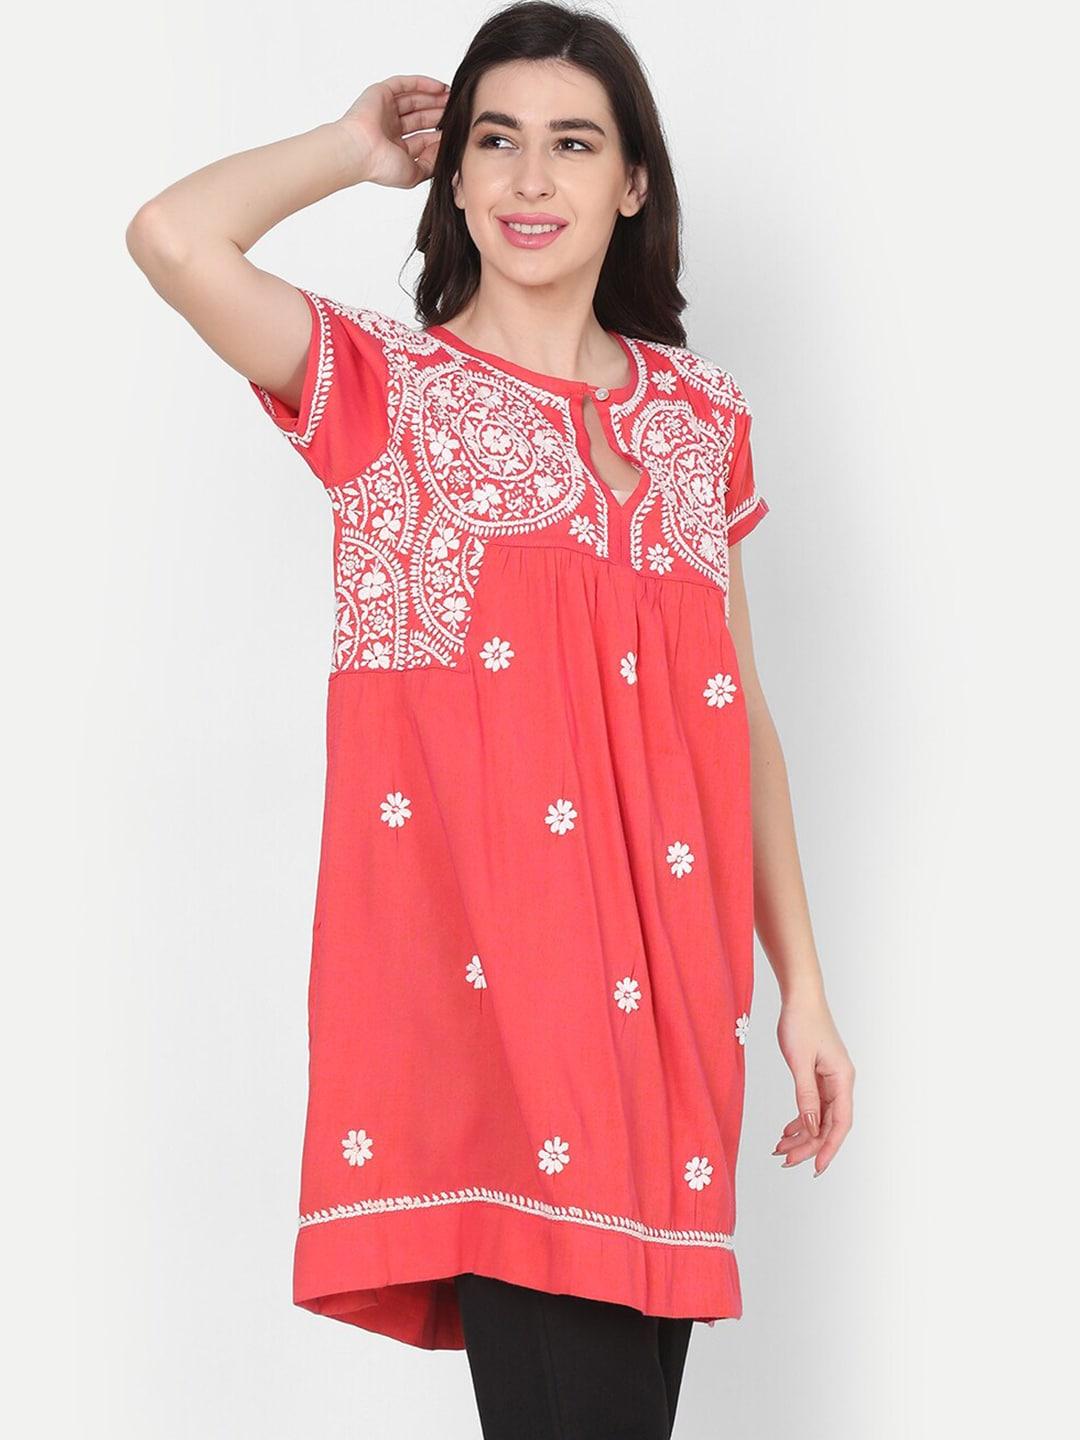 house-of-kari-pink-&-white-embroidered-tunic